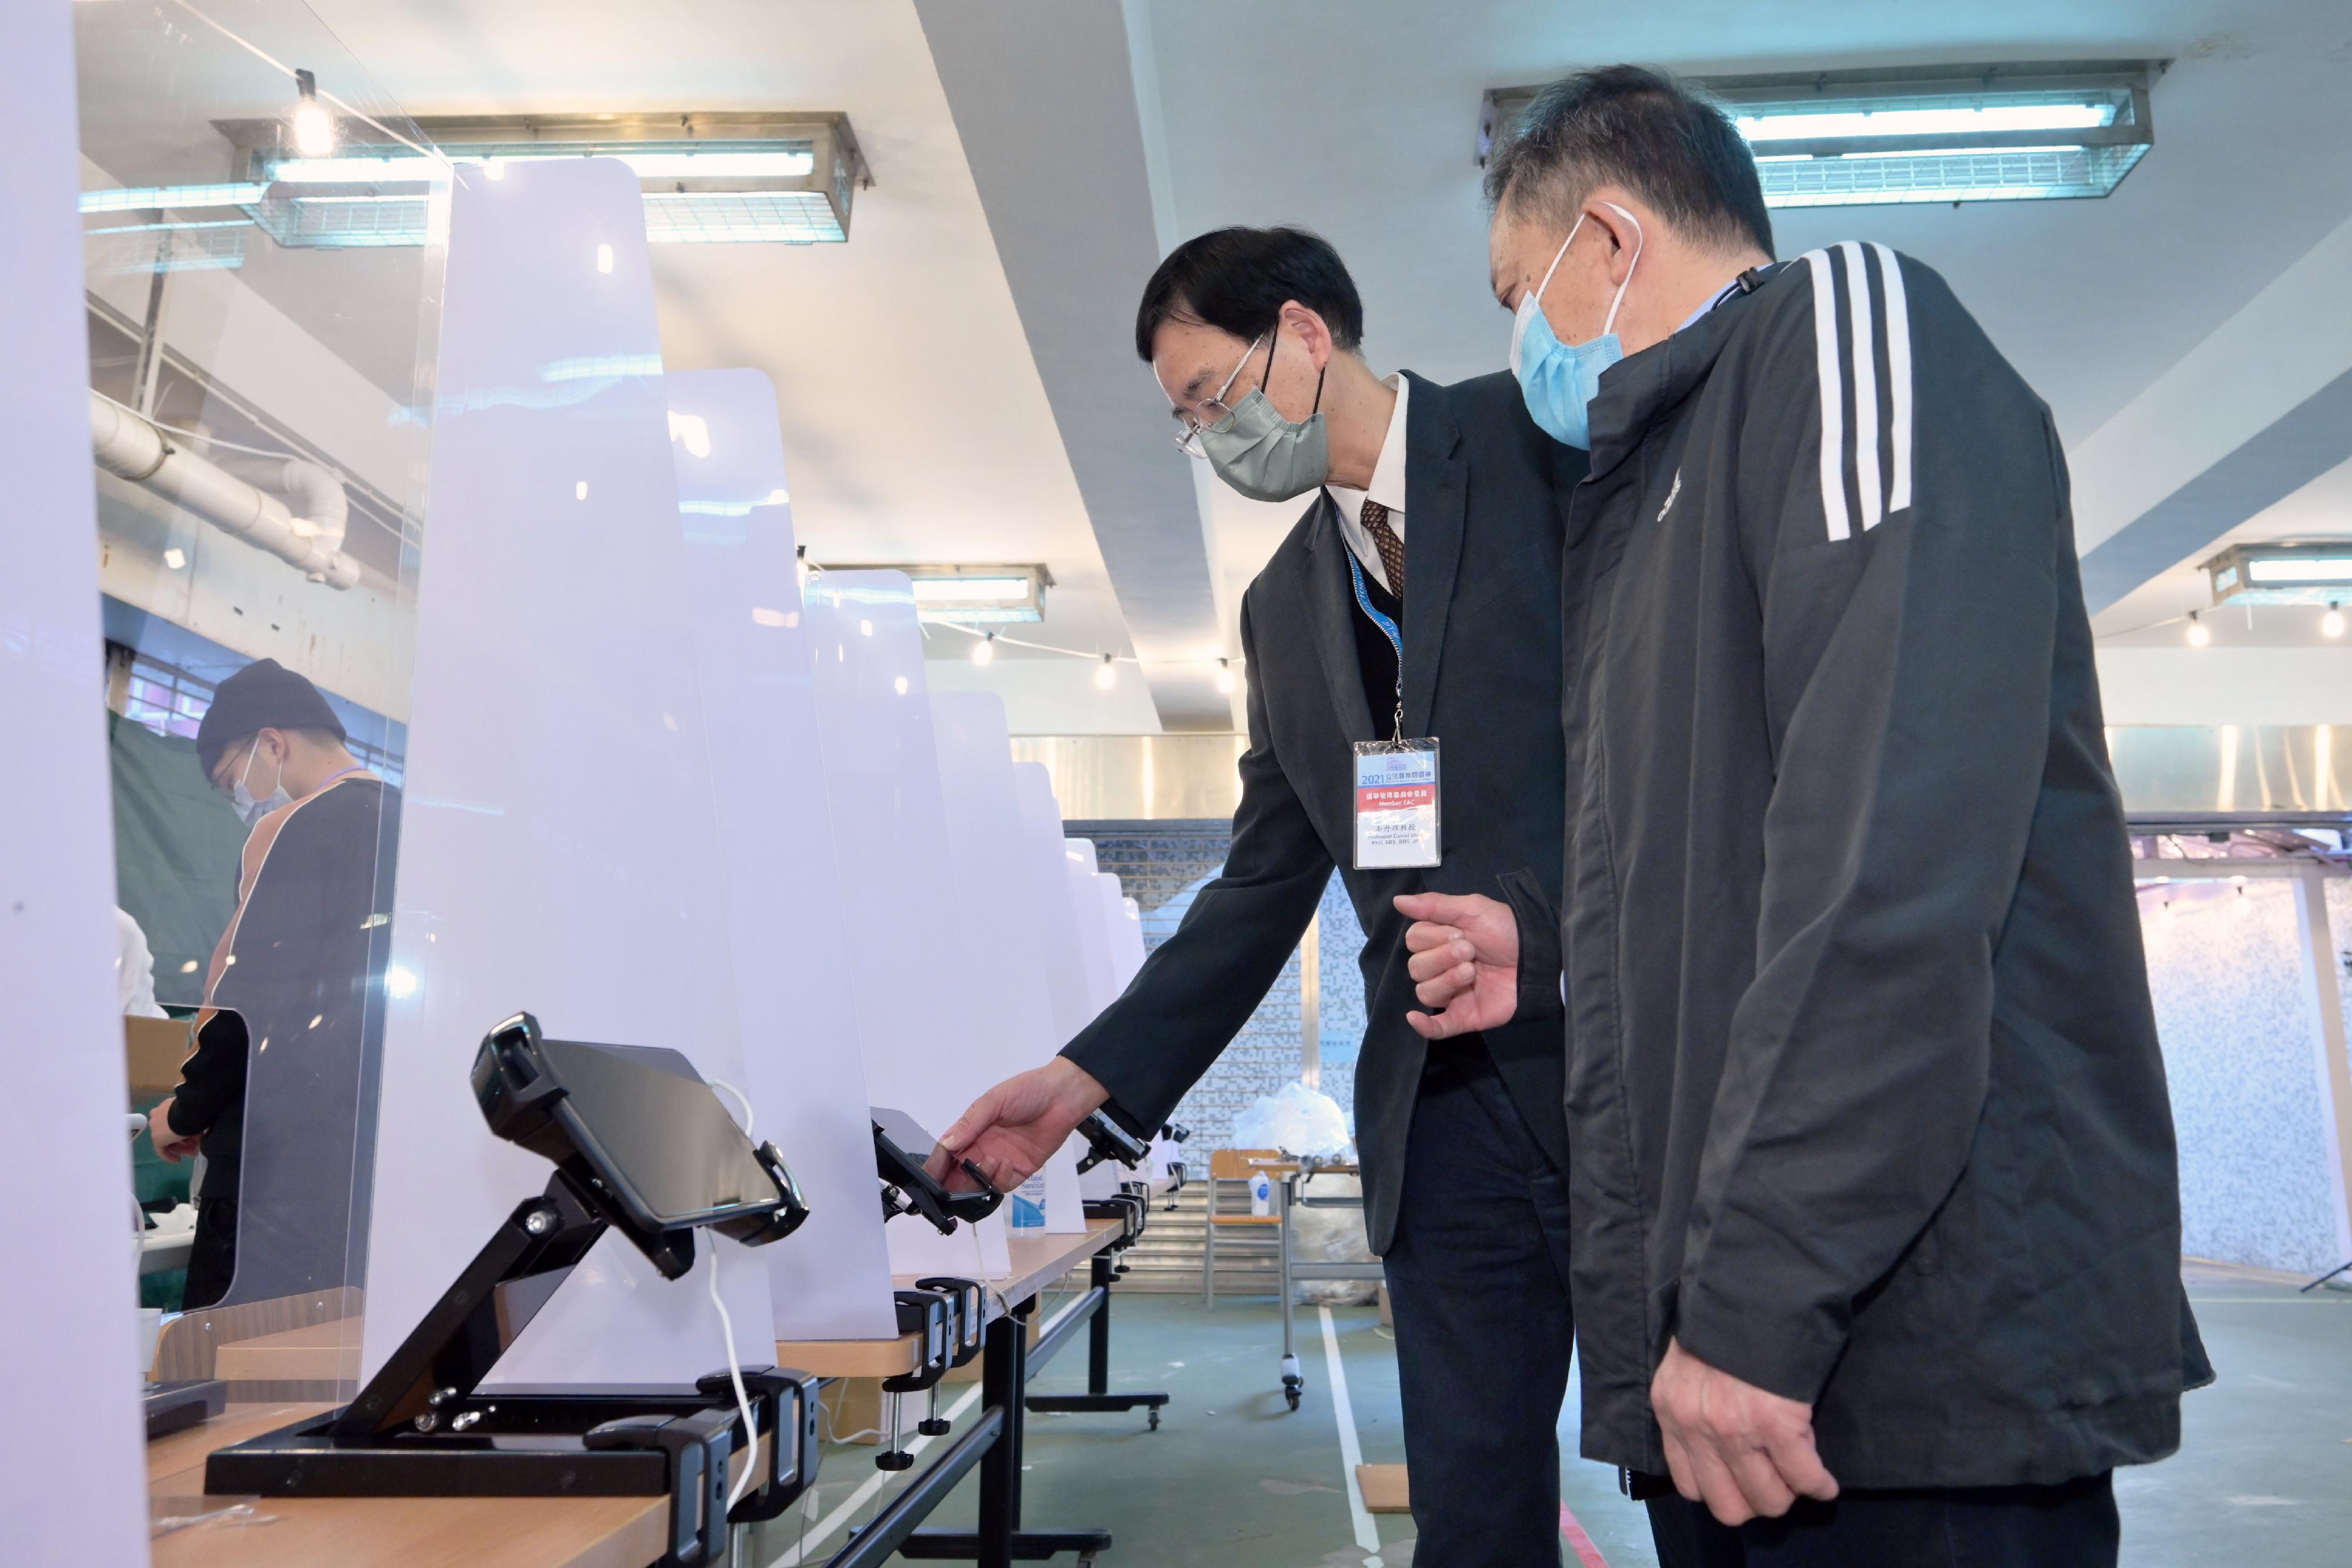 Electoral Affairs Commission member Professor Daniel Shek (left), visits the polling station of the 2021 Legislative Council General Election at Fung Kai Liu Yun Sum Memorial School today (December 18) to inspect the electoral preparation work. He is briefed by the Presiding Officer on the operation of the Electronic Poll Register system.